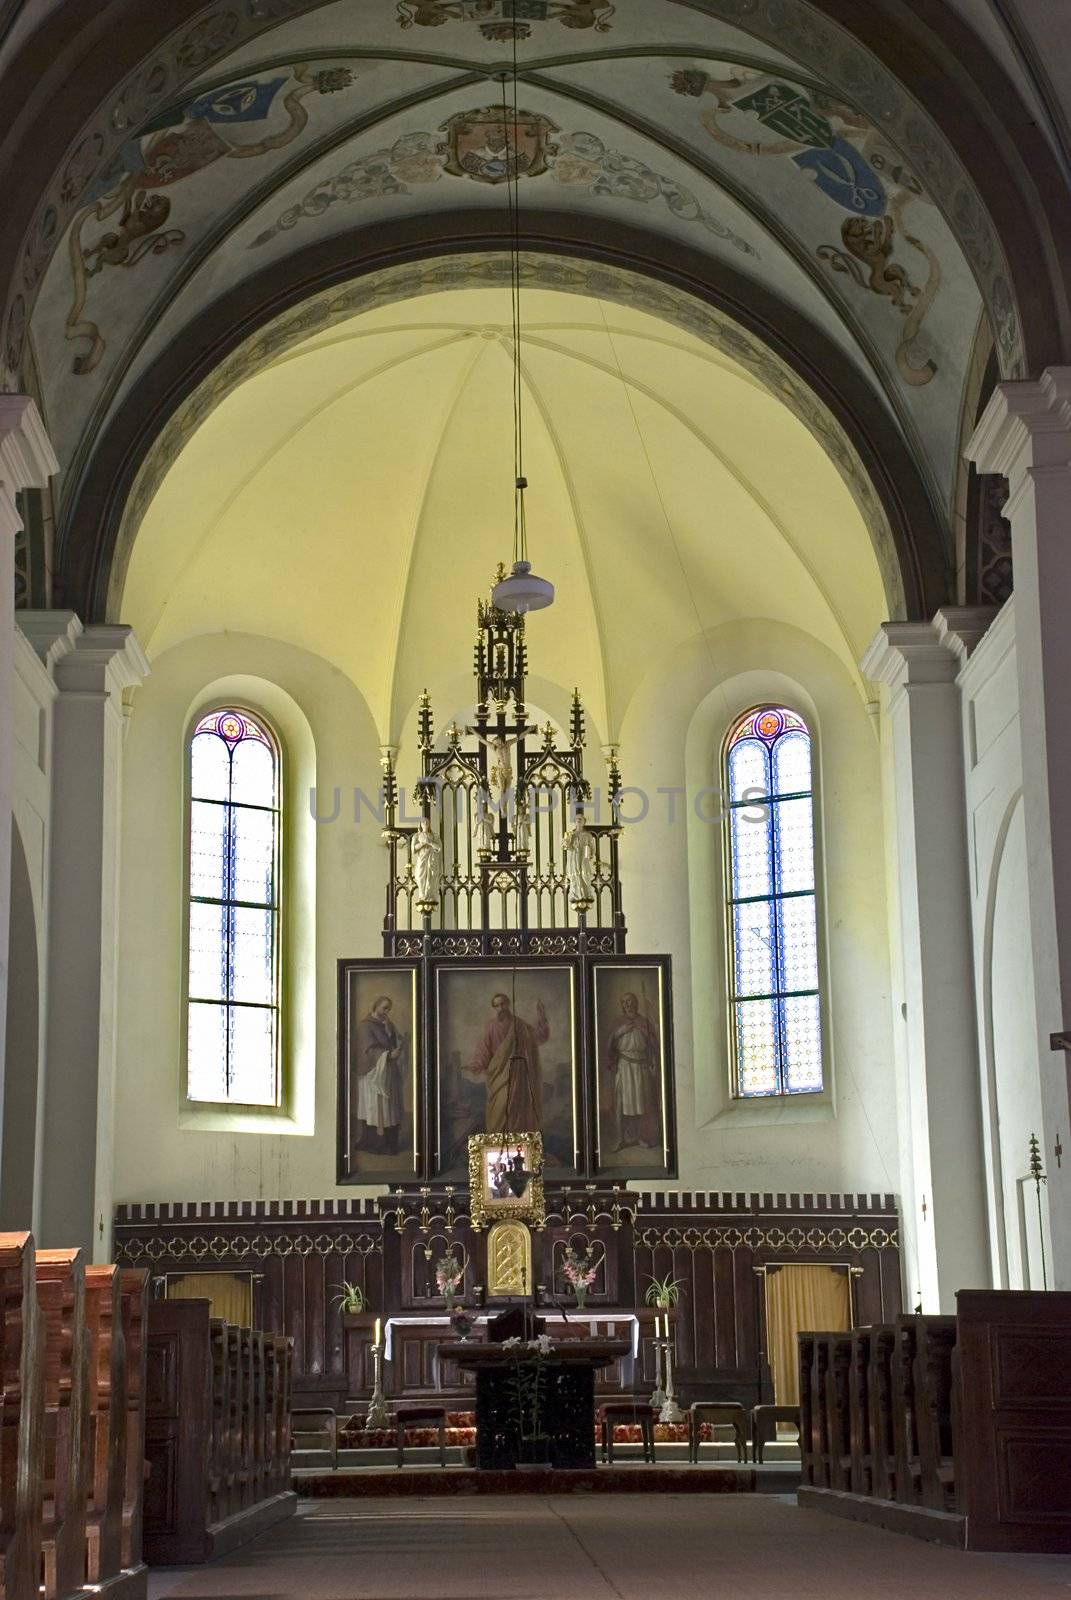 Interior of the church with altar